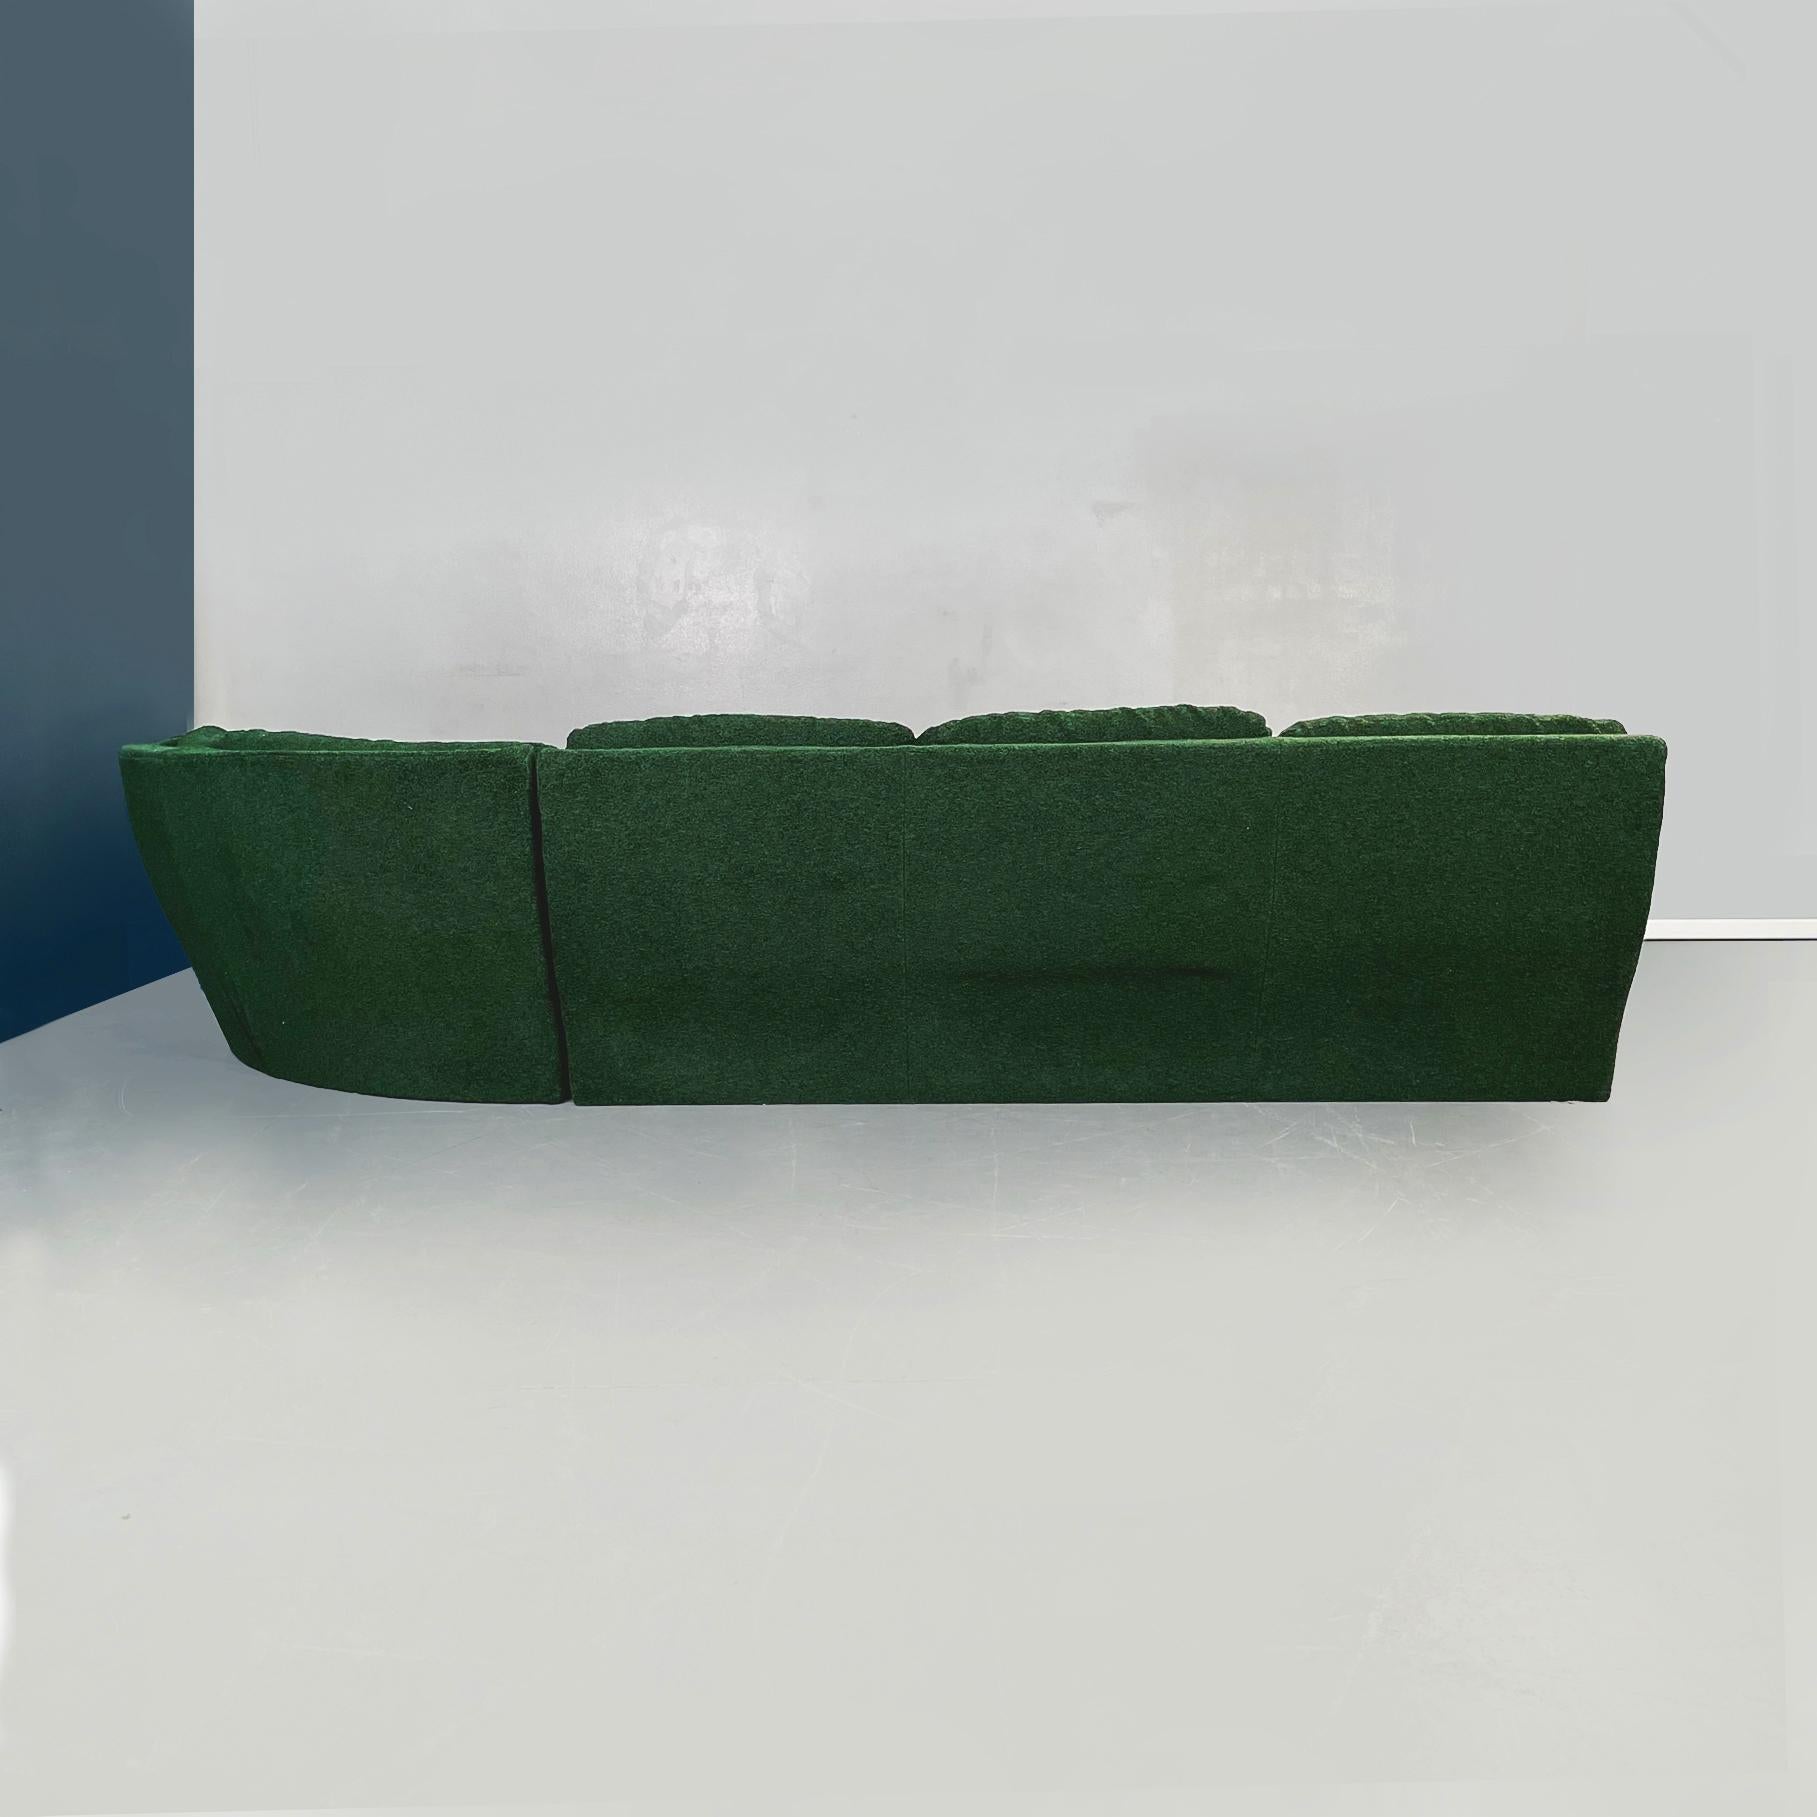 Late 20th Century Italian Space Age Modular Sofa in Green Fabric by Willy Rizzo for Sabot, 1970s